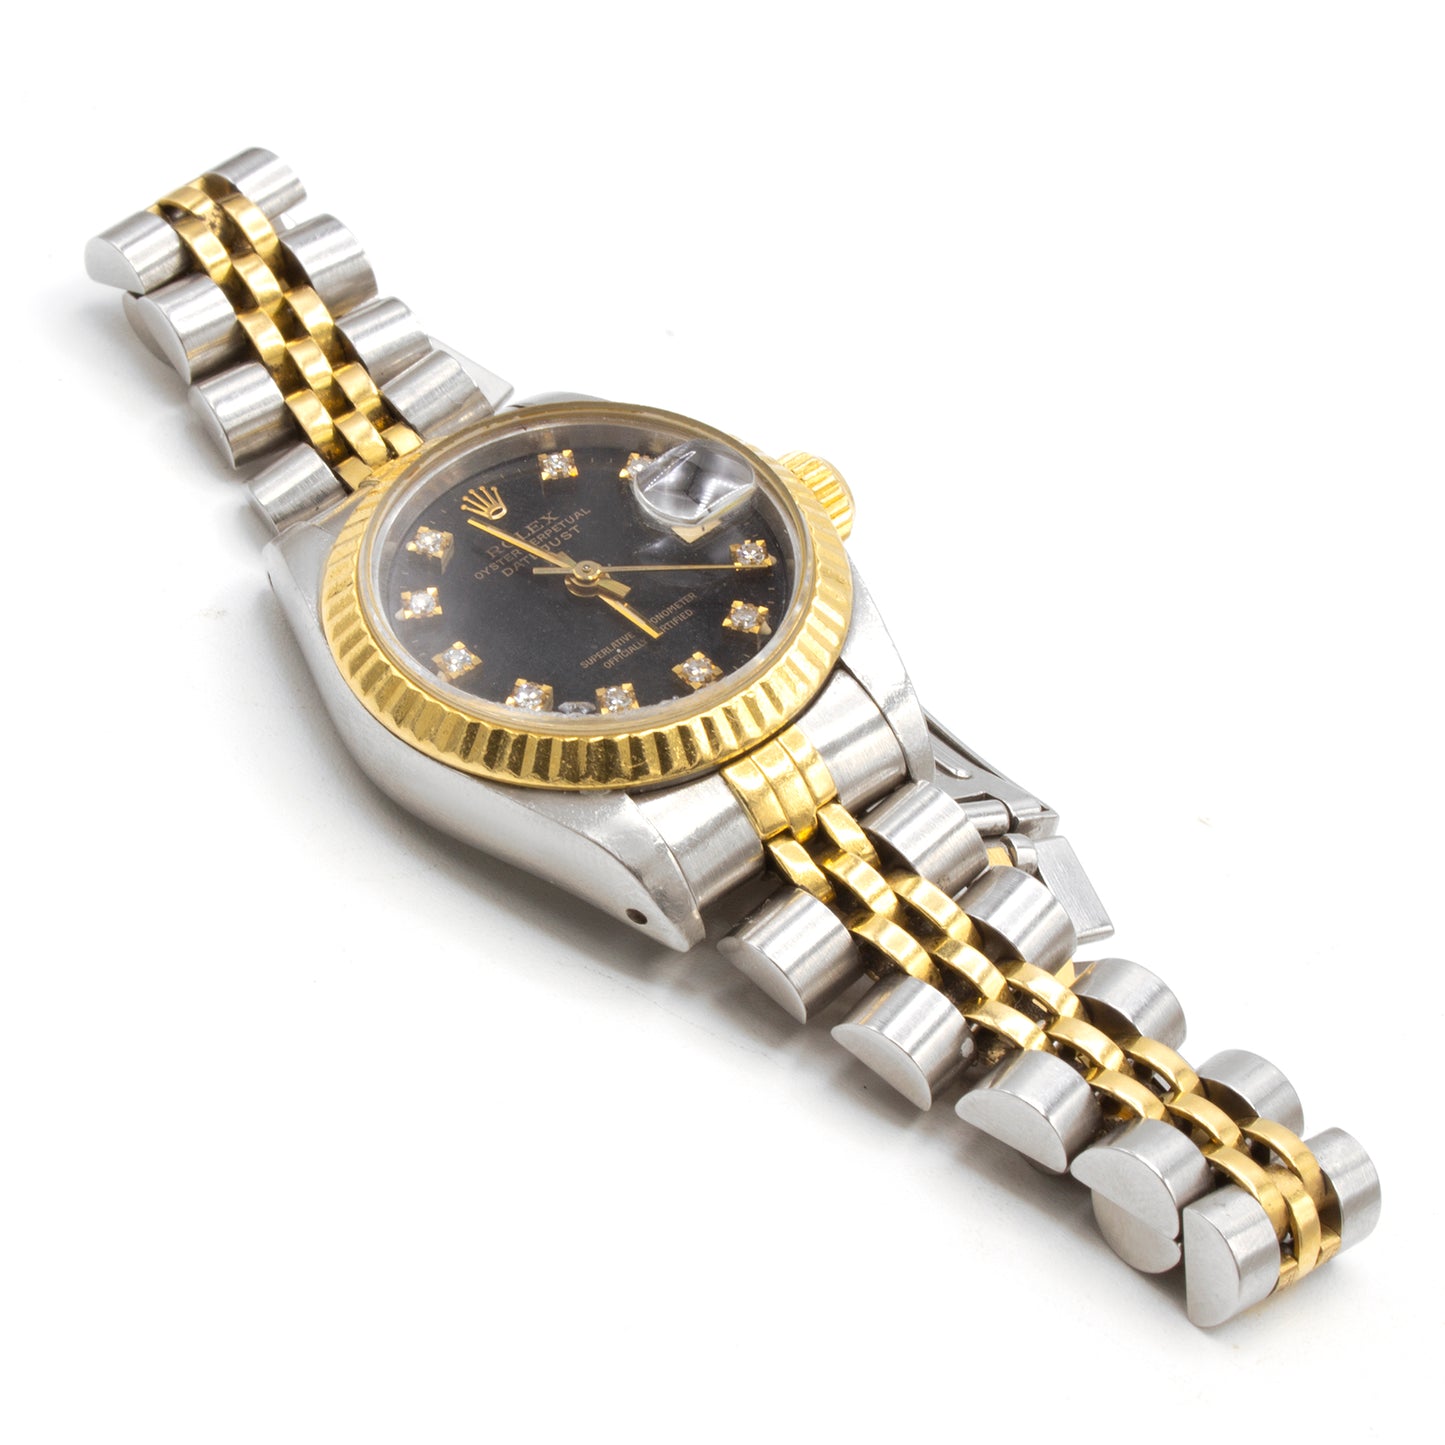 Rolex Oyster Perpetual Datejust 69173 watch